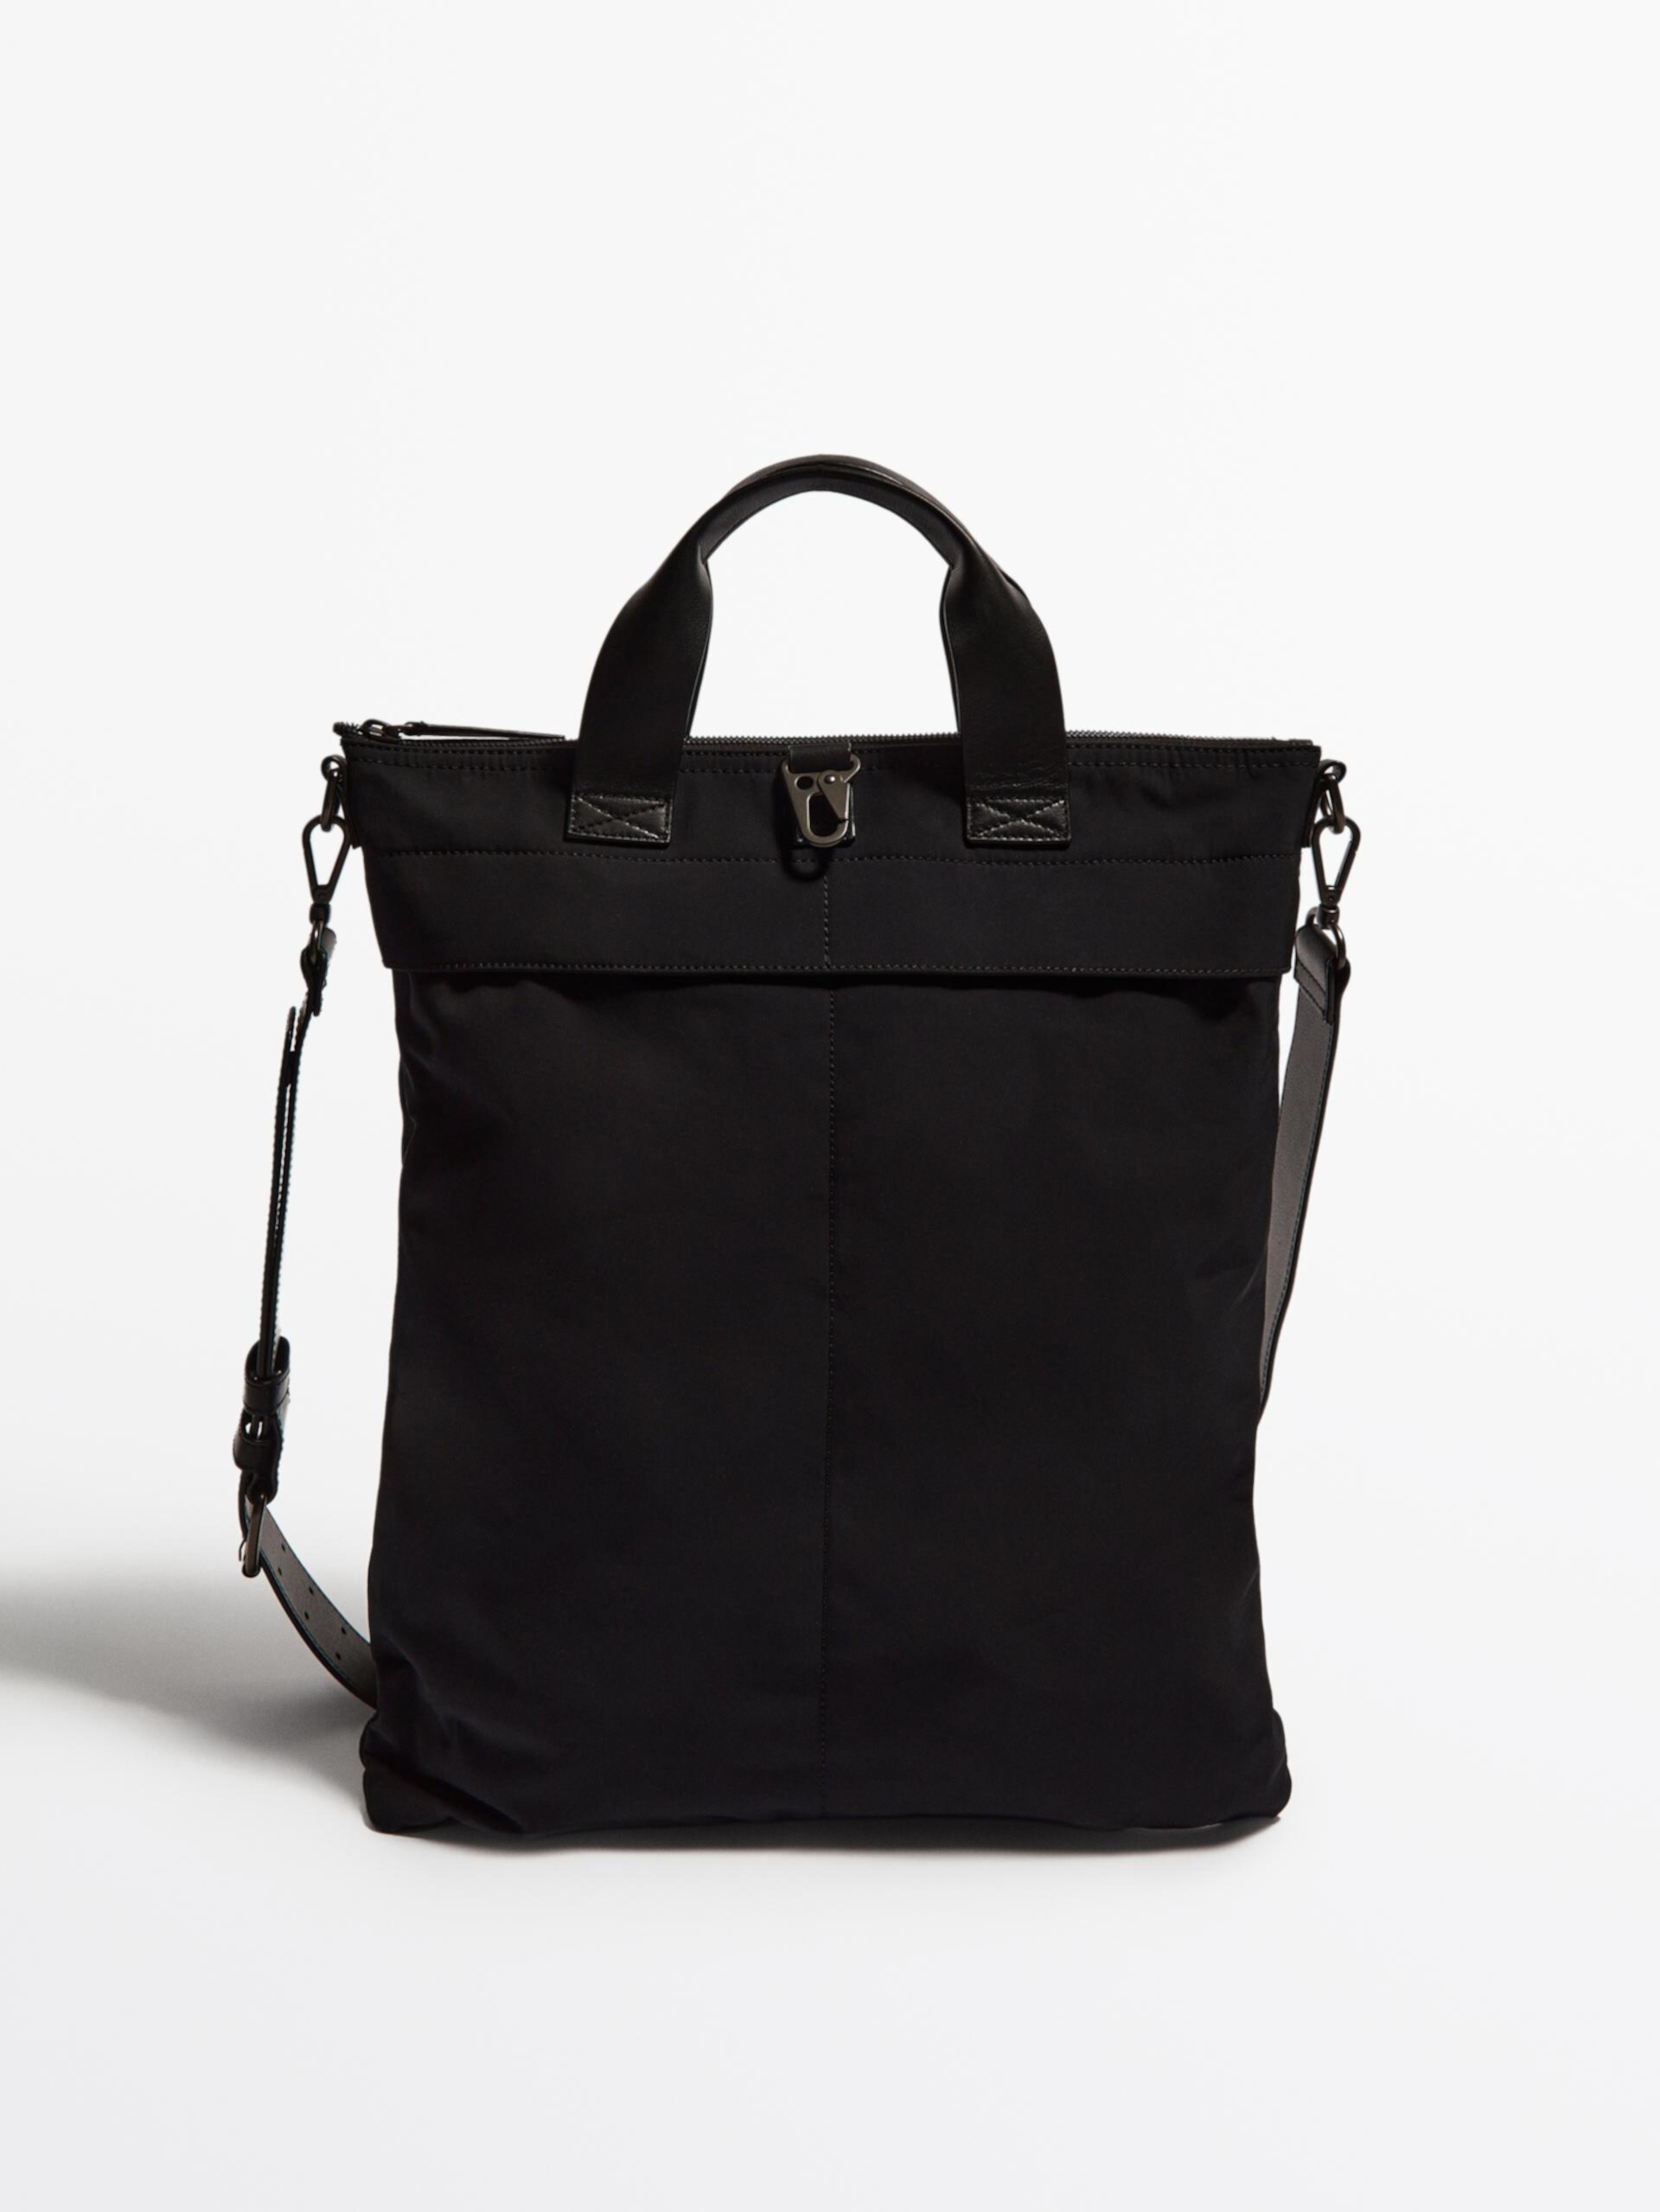 Contrast nylon tote bag with leather details - Studio ZARA